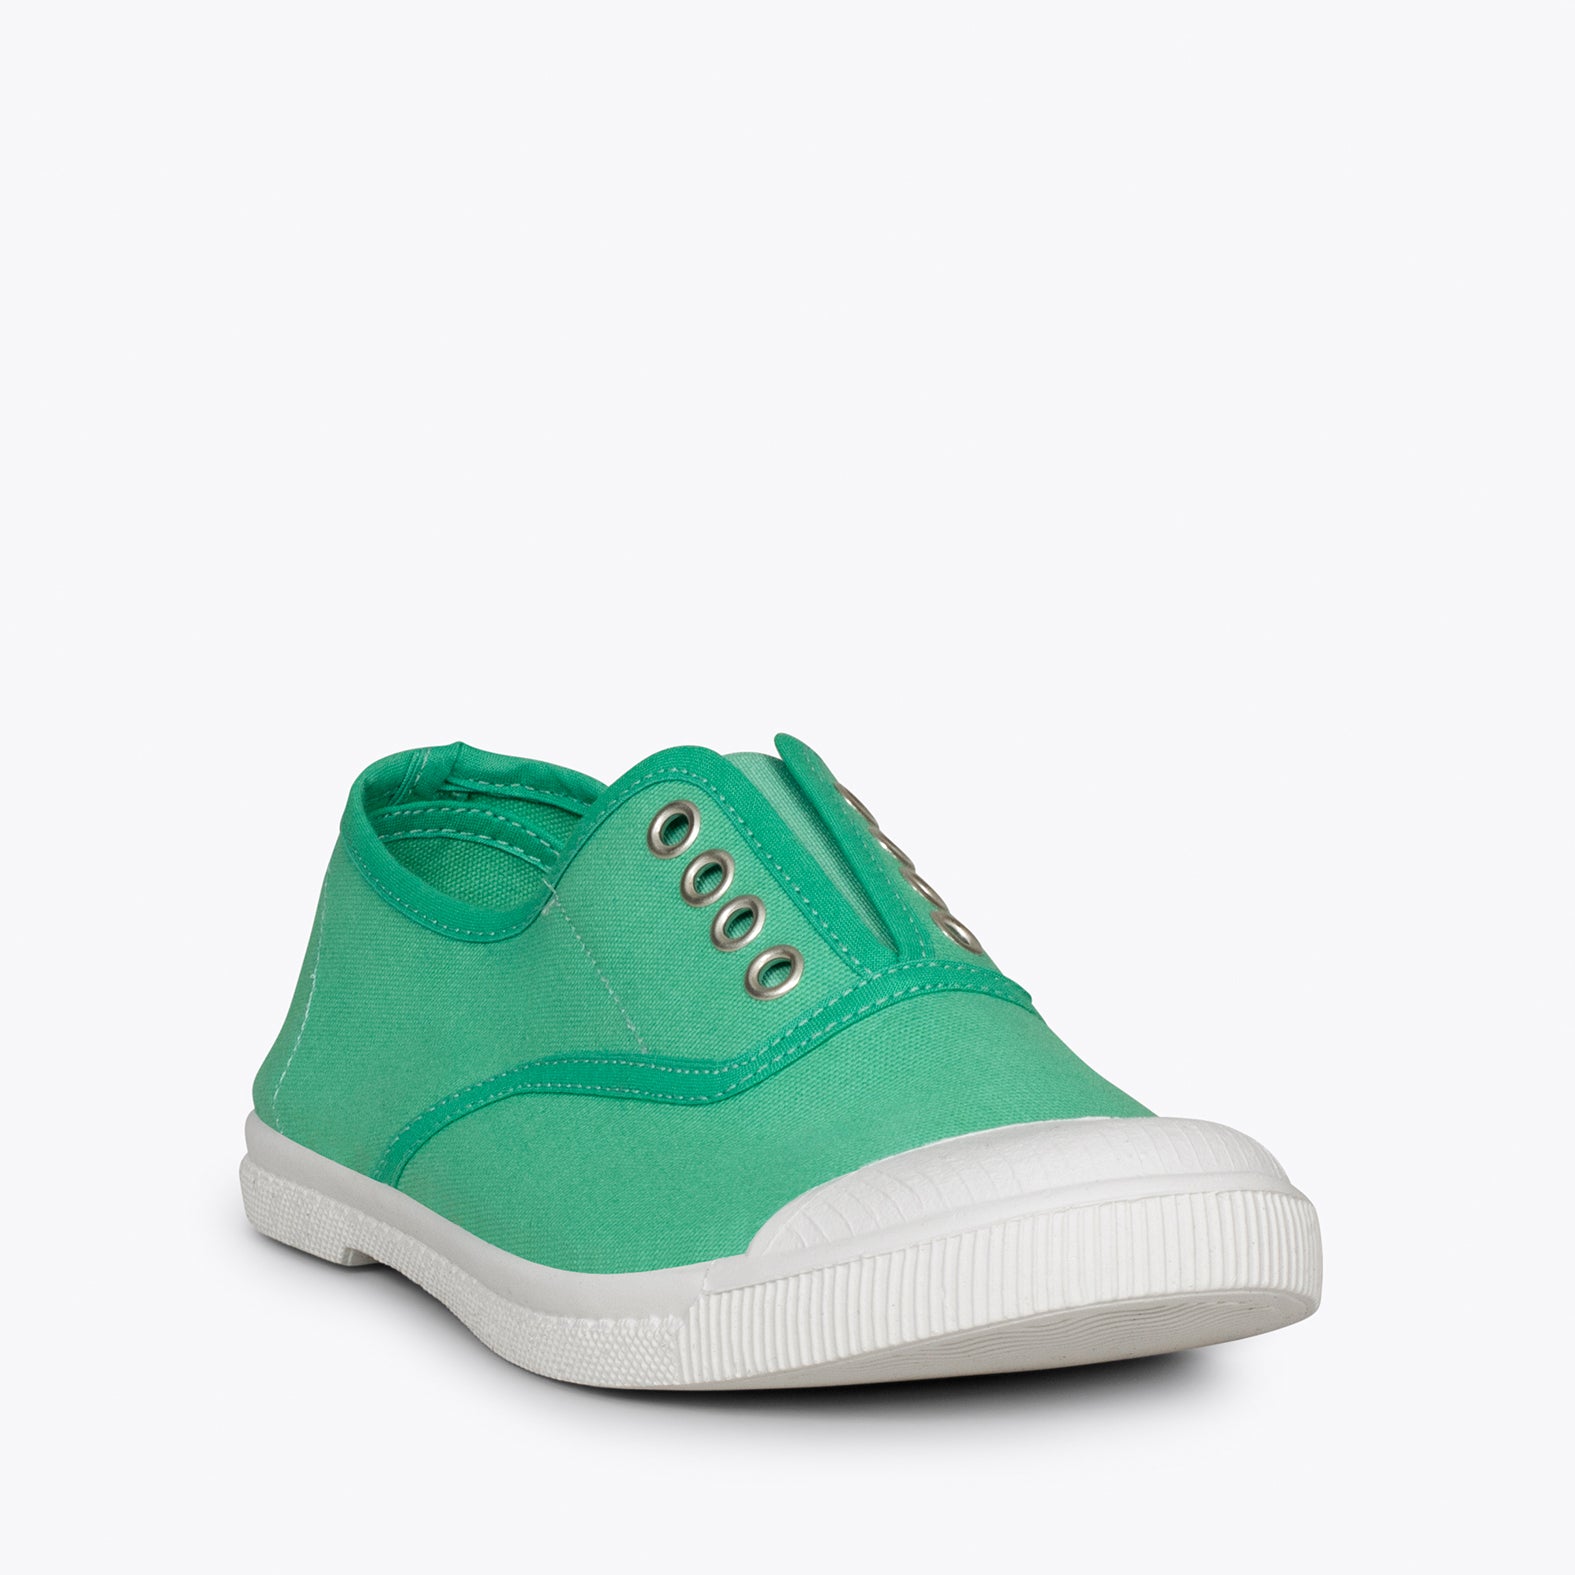 WAY – GREEN sneakers with elastic